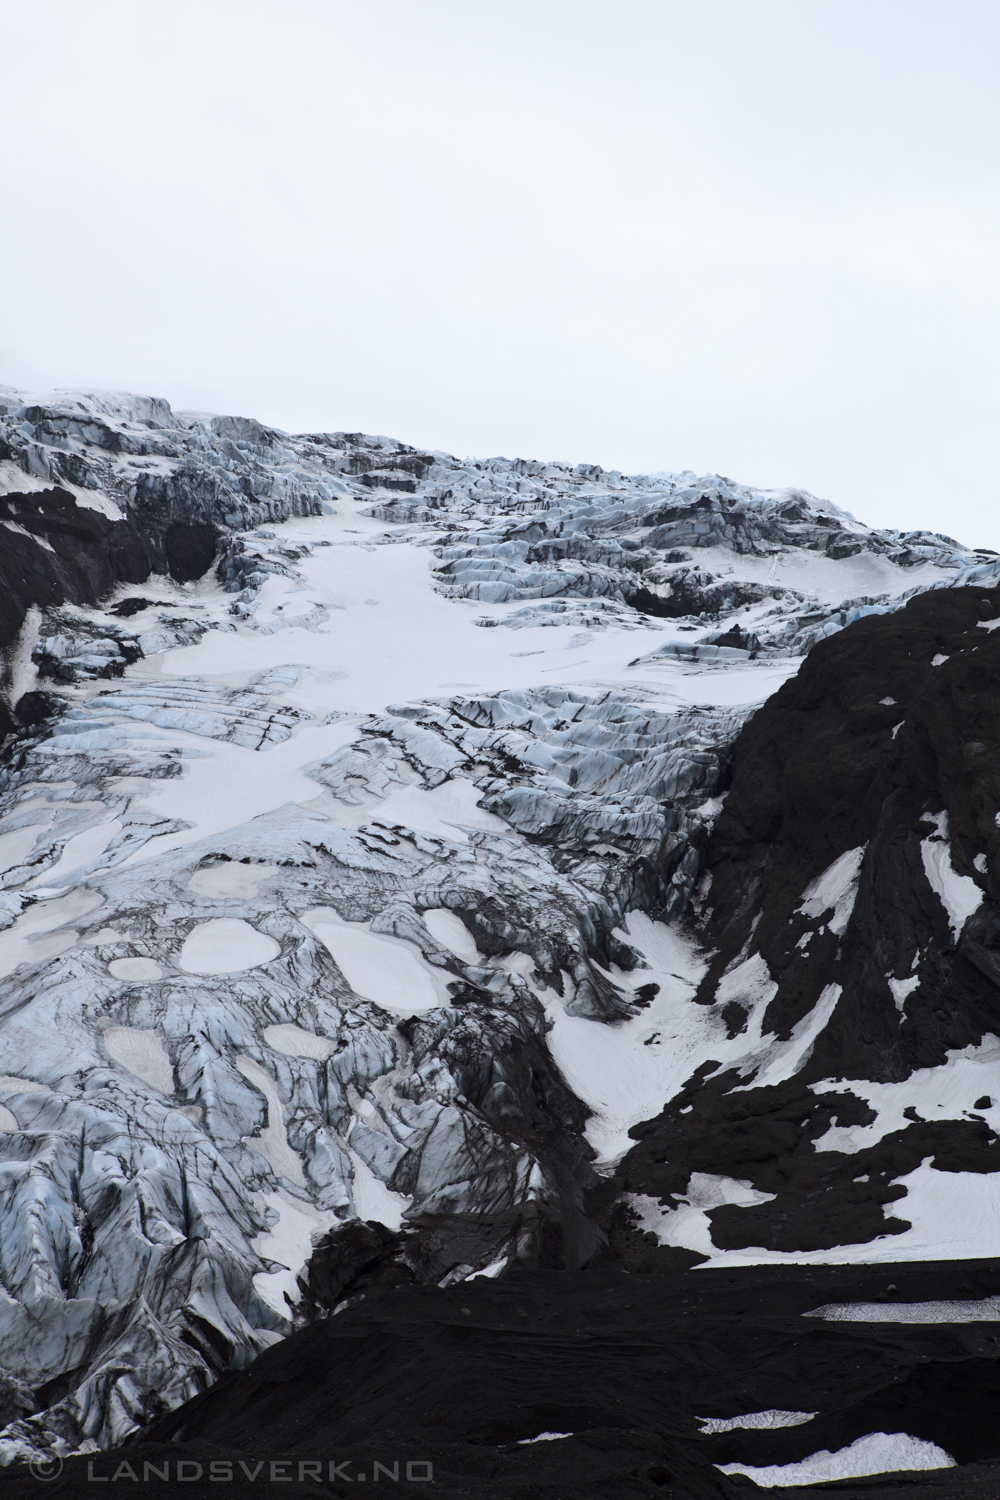 Eyjafjallajökull, with one of it's glacier tongues stretching out. 

(Canon EOS 5D Mark II / Canon EF 24-70mm f/2.8 L USM)